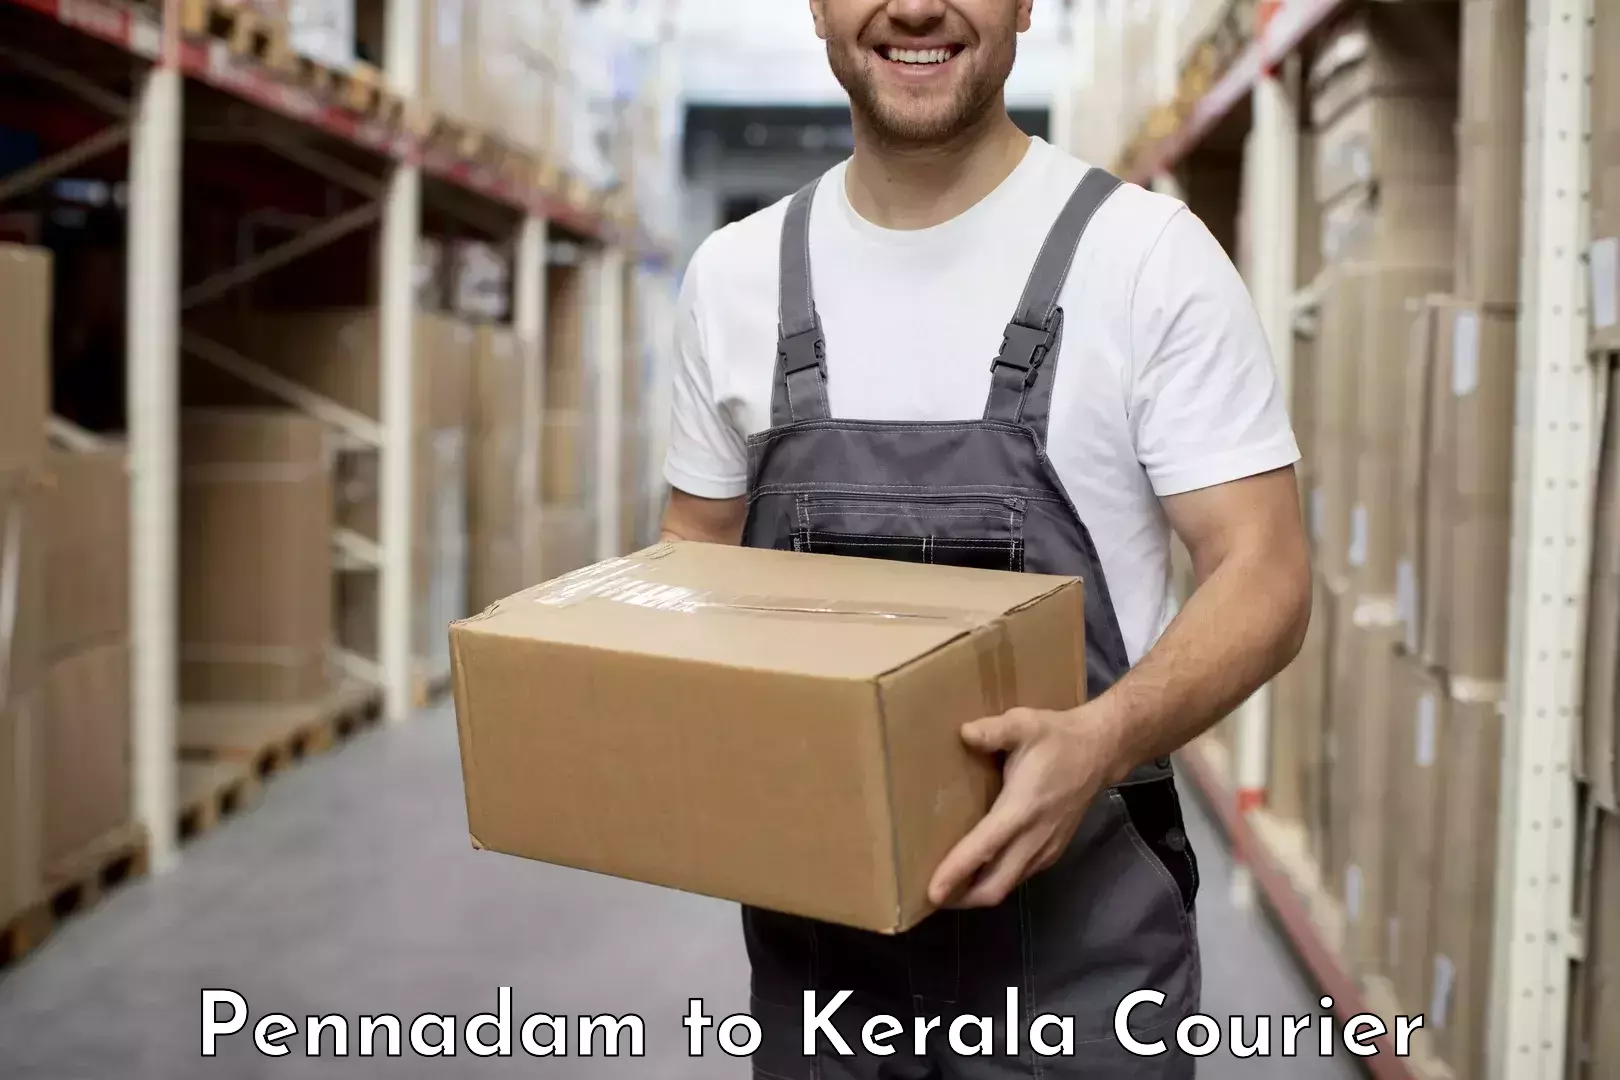 State-of-the-art courier technology Pennadam to Kerala